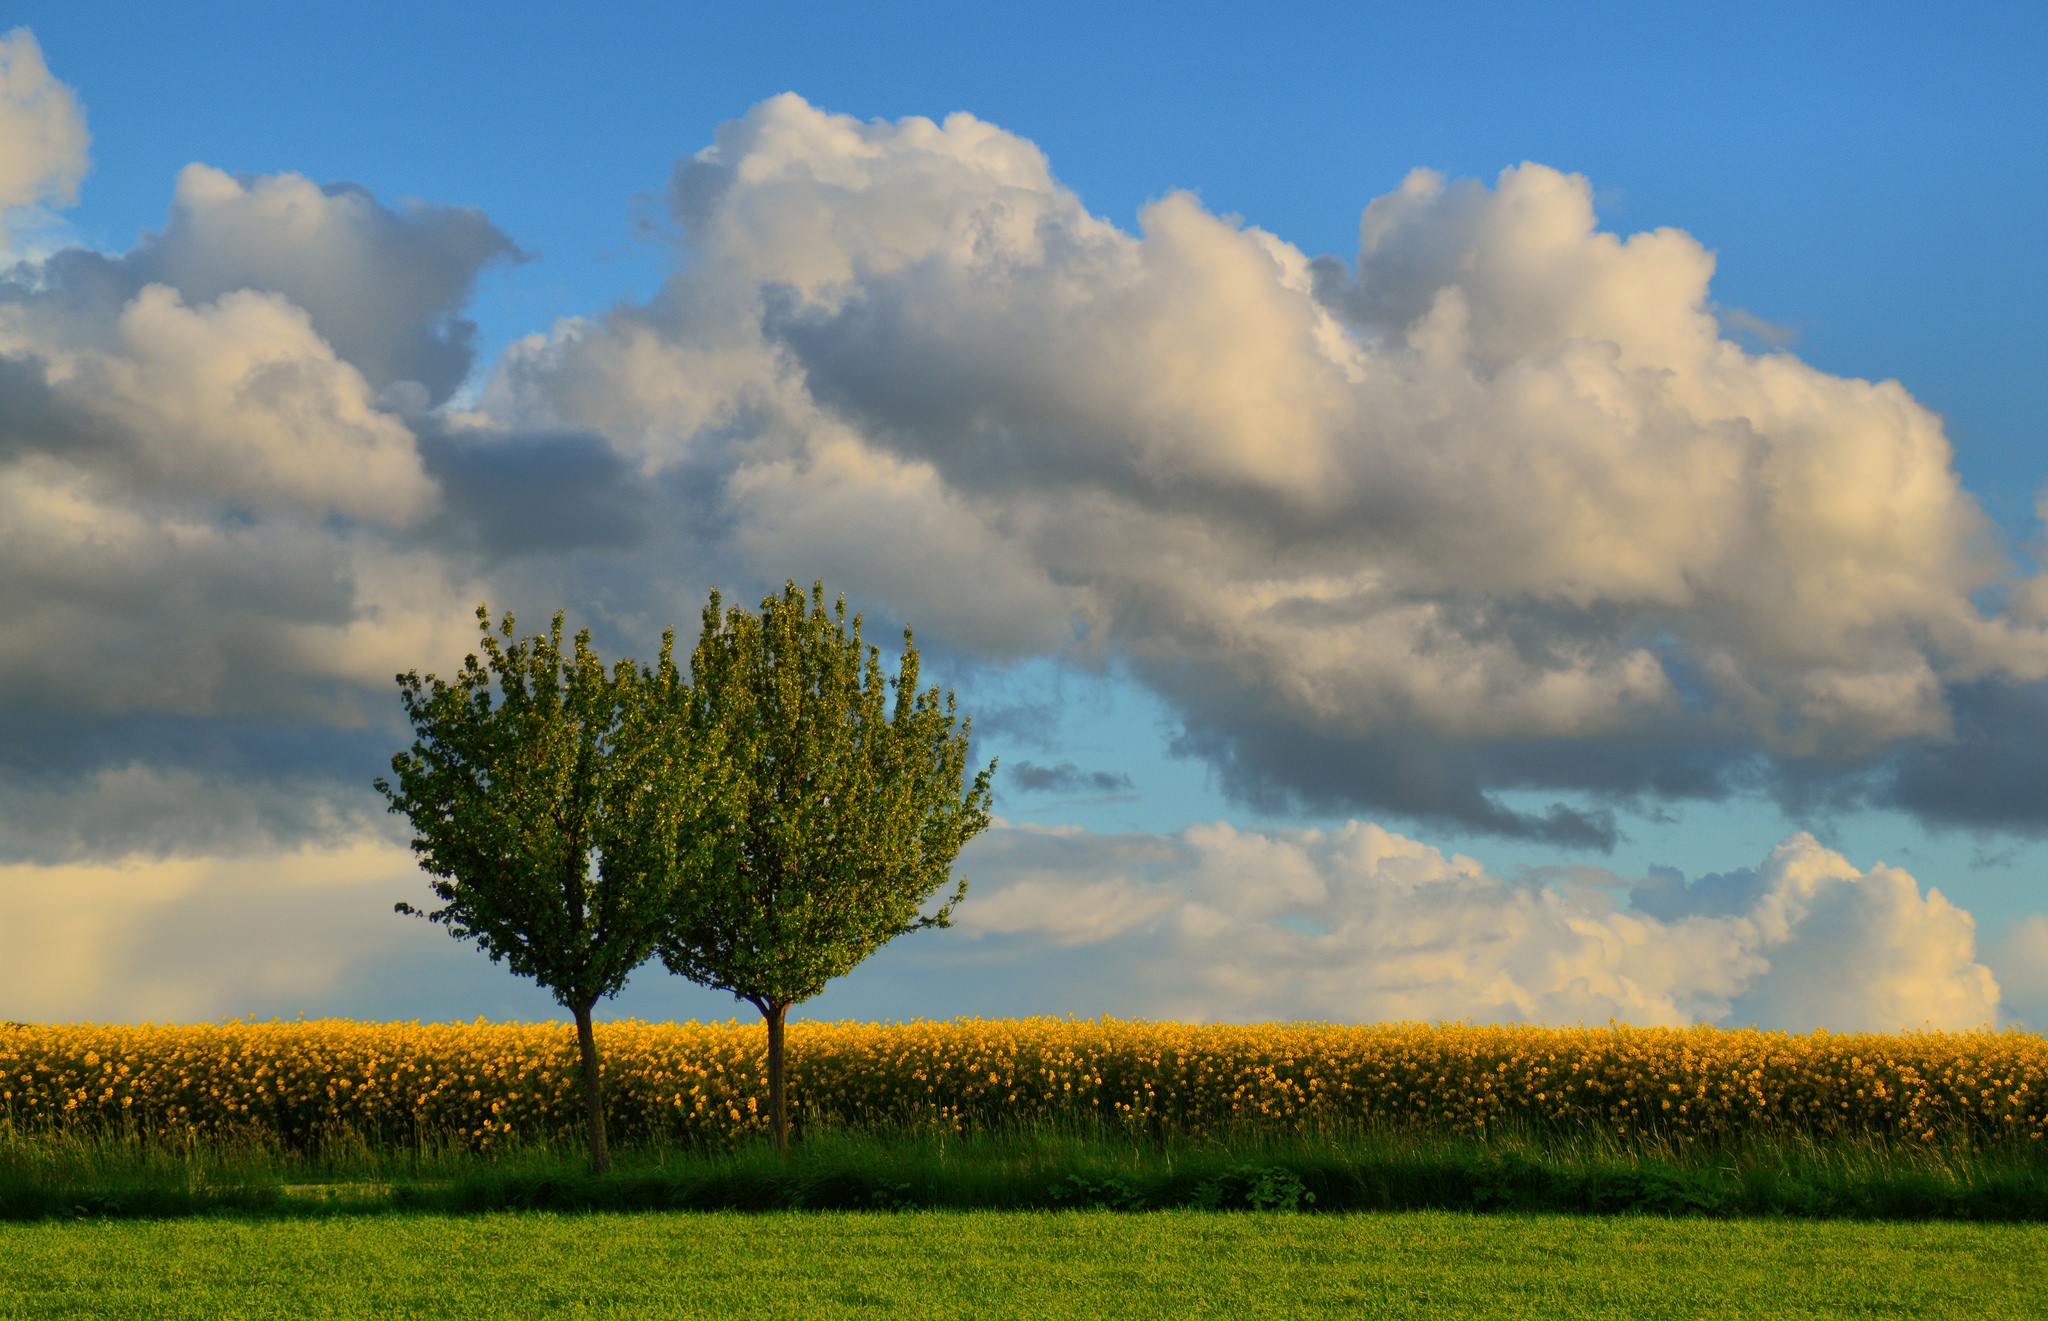 General 2048x1321 trees landscape yellow flowers clouds Agro (Plants)